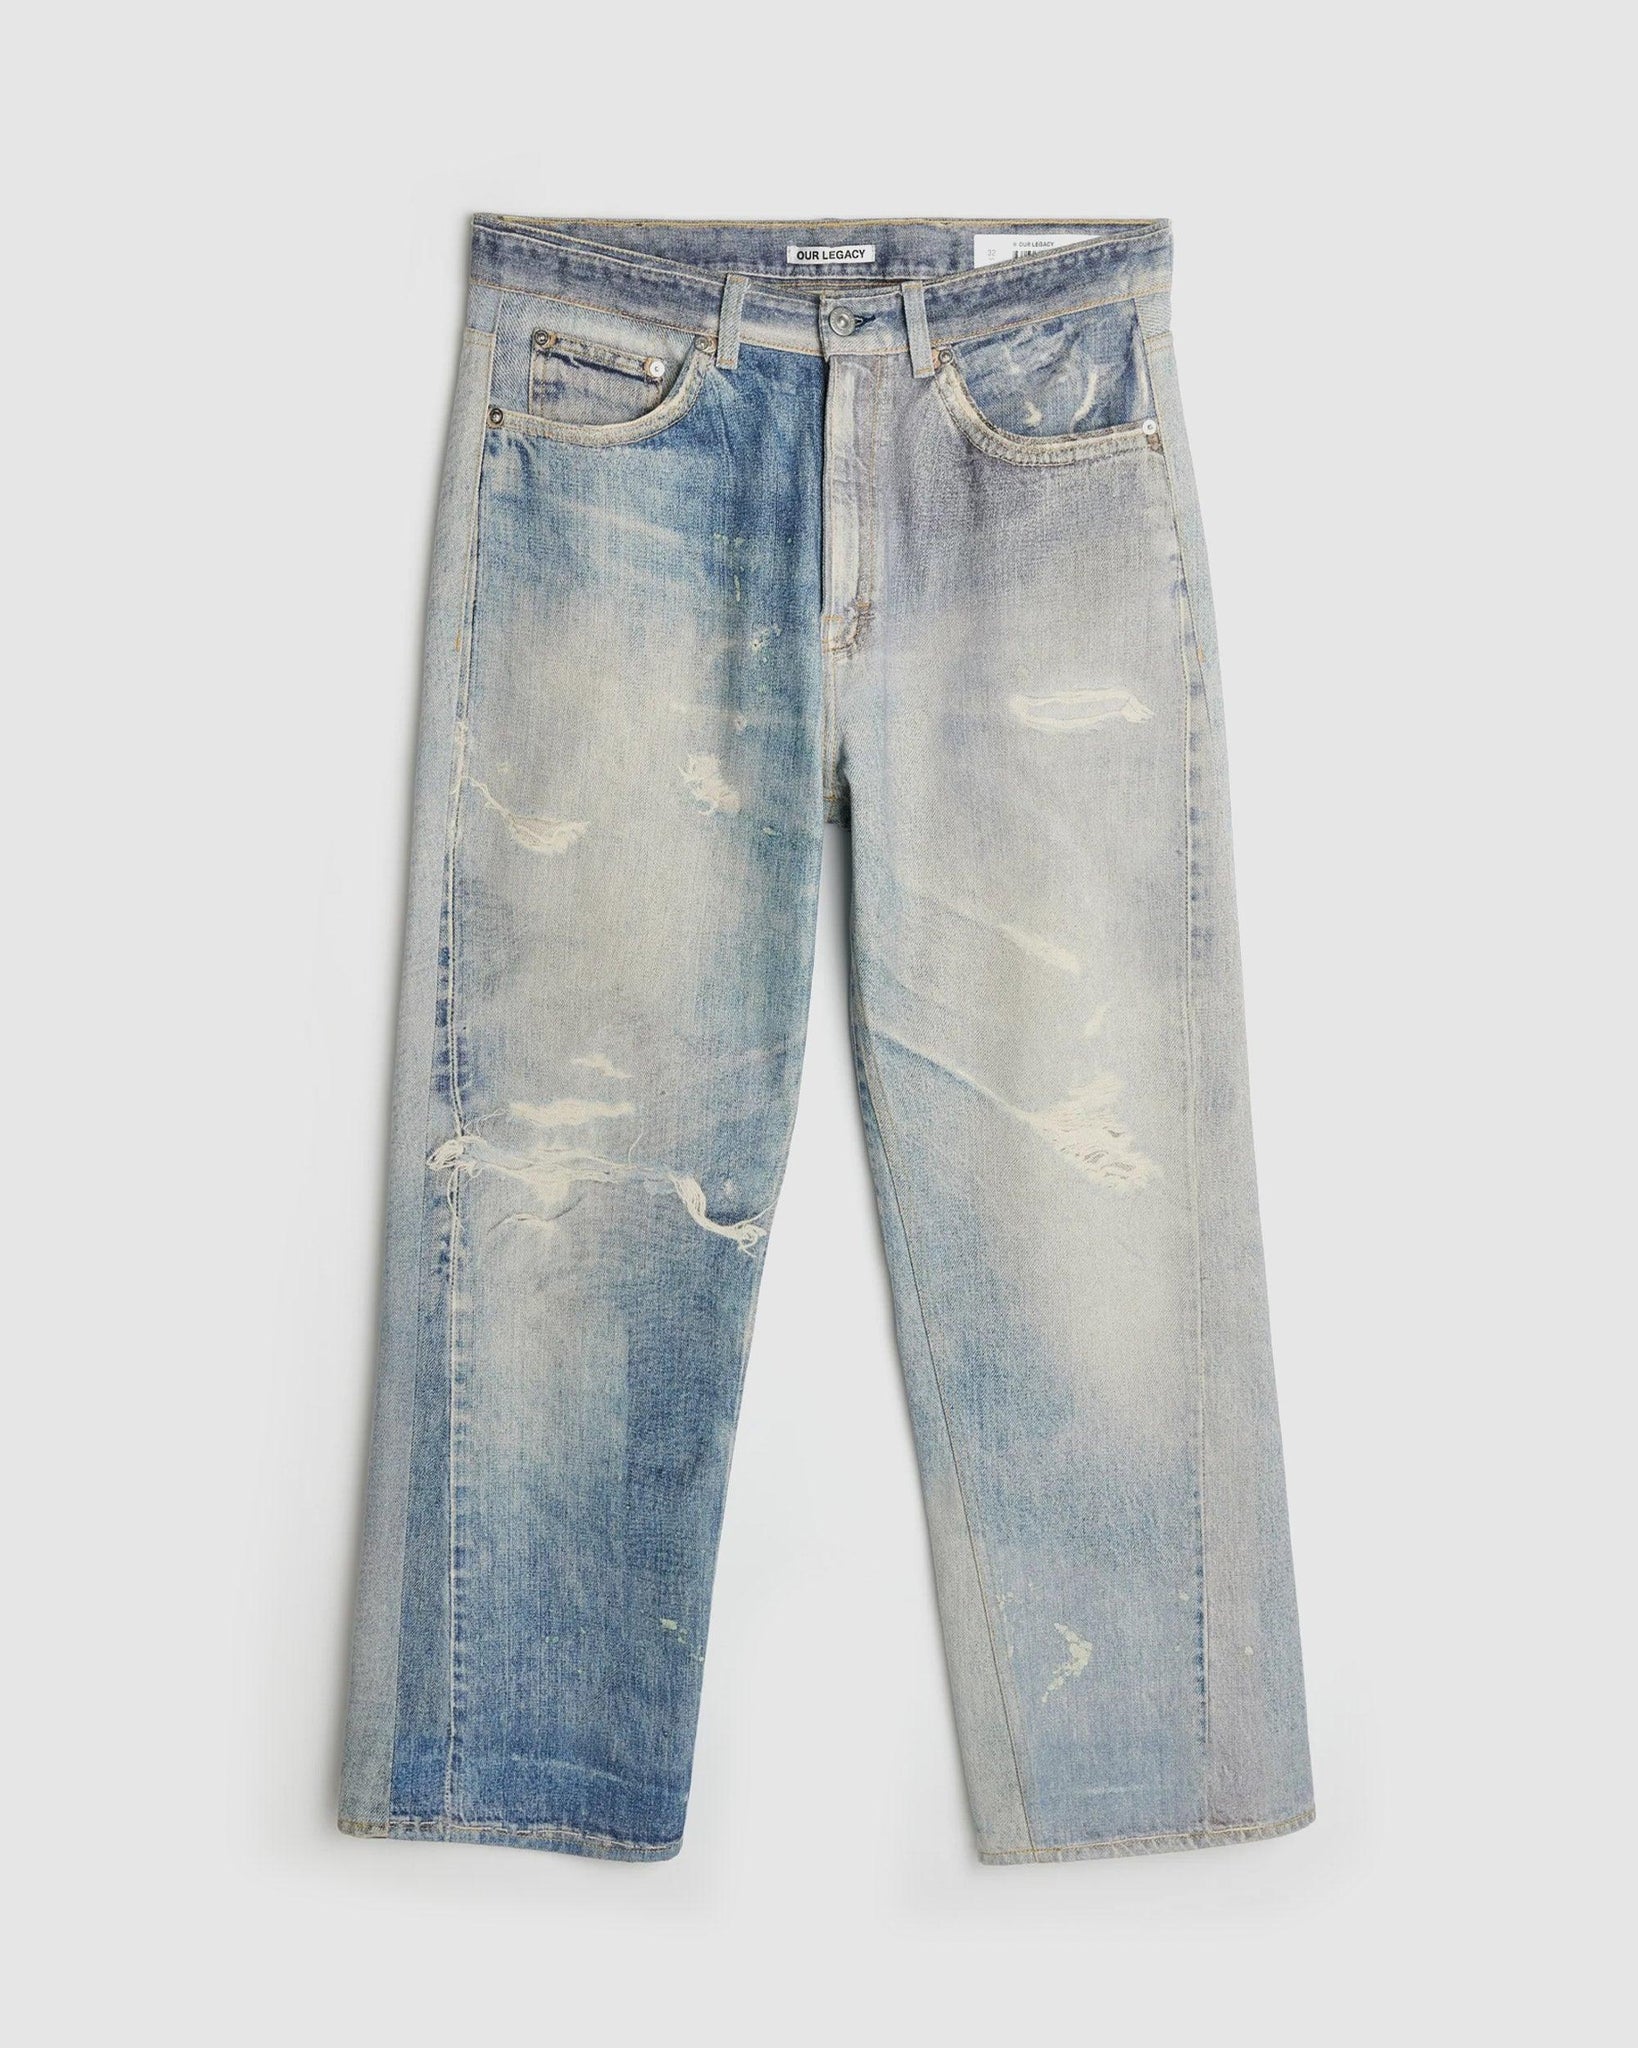 Third Cut Digital Denim Print Jeans - {{ collection.title }} - Chinatown Country Club 